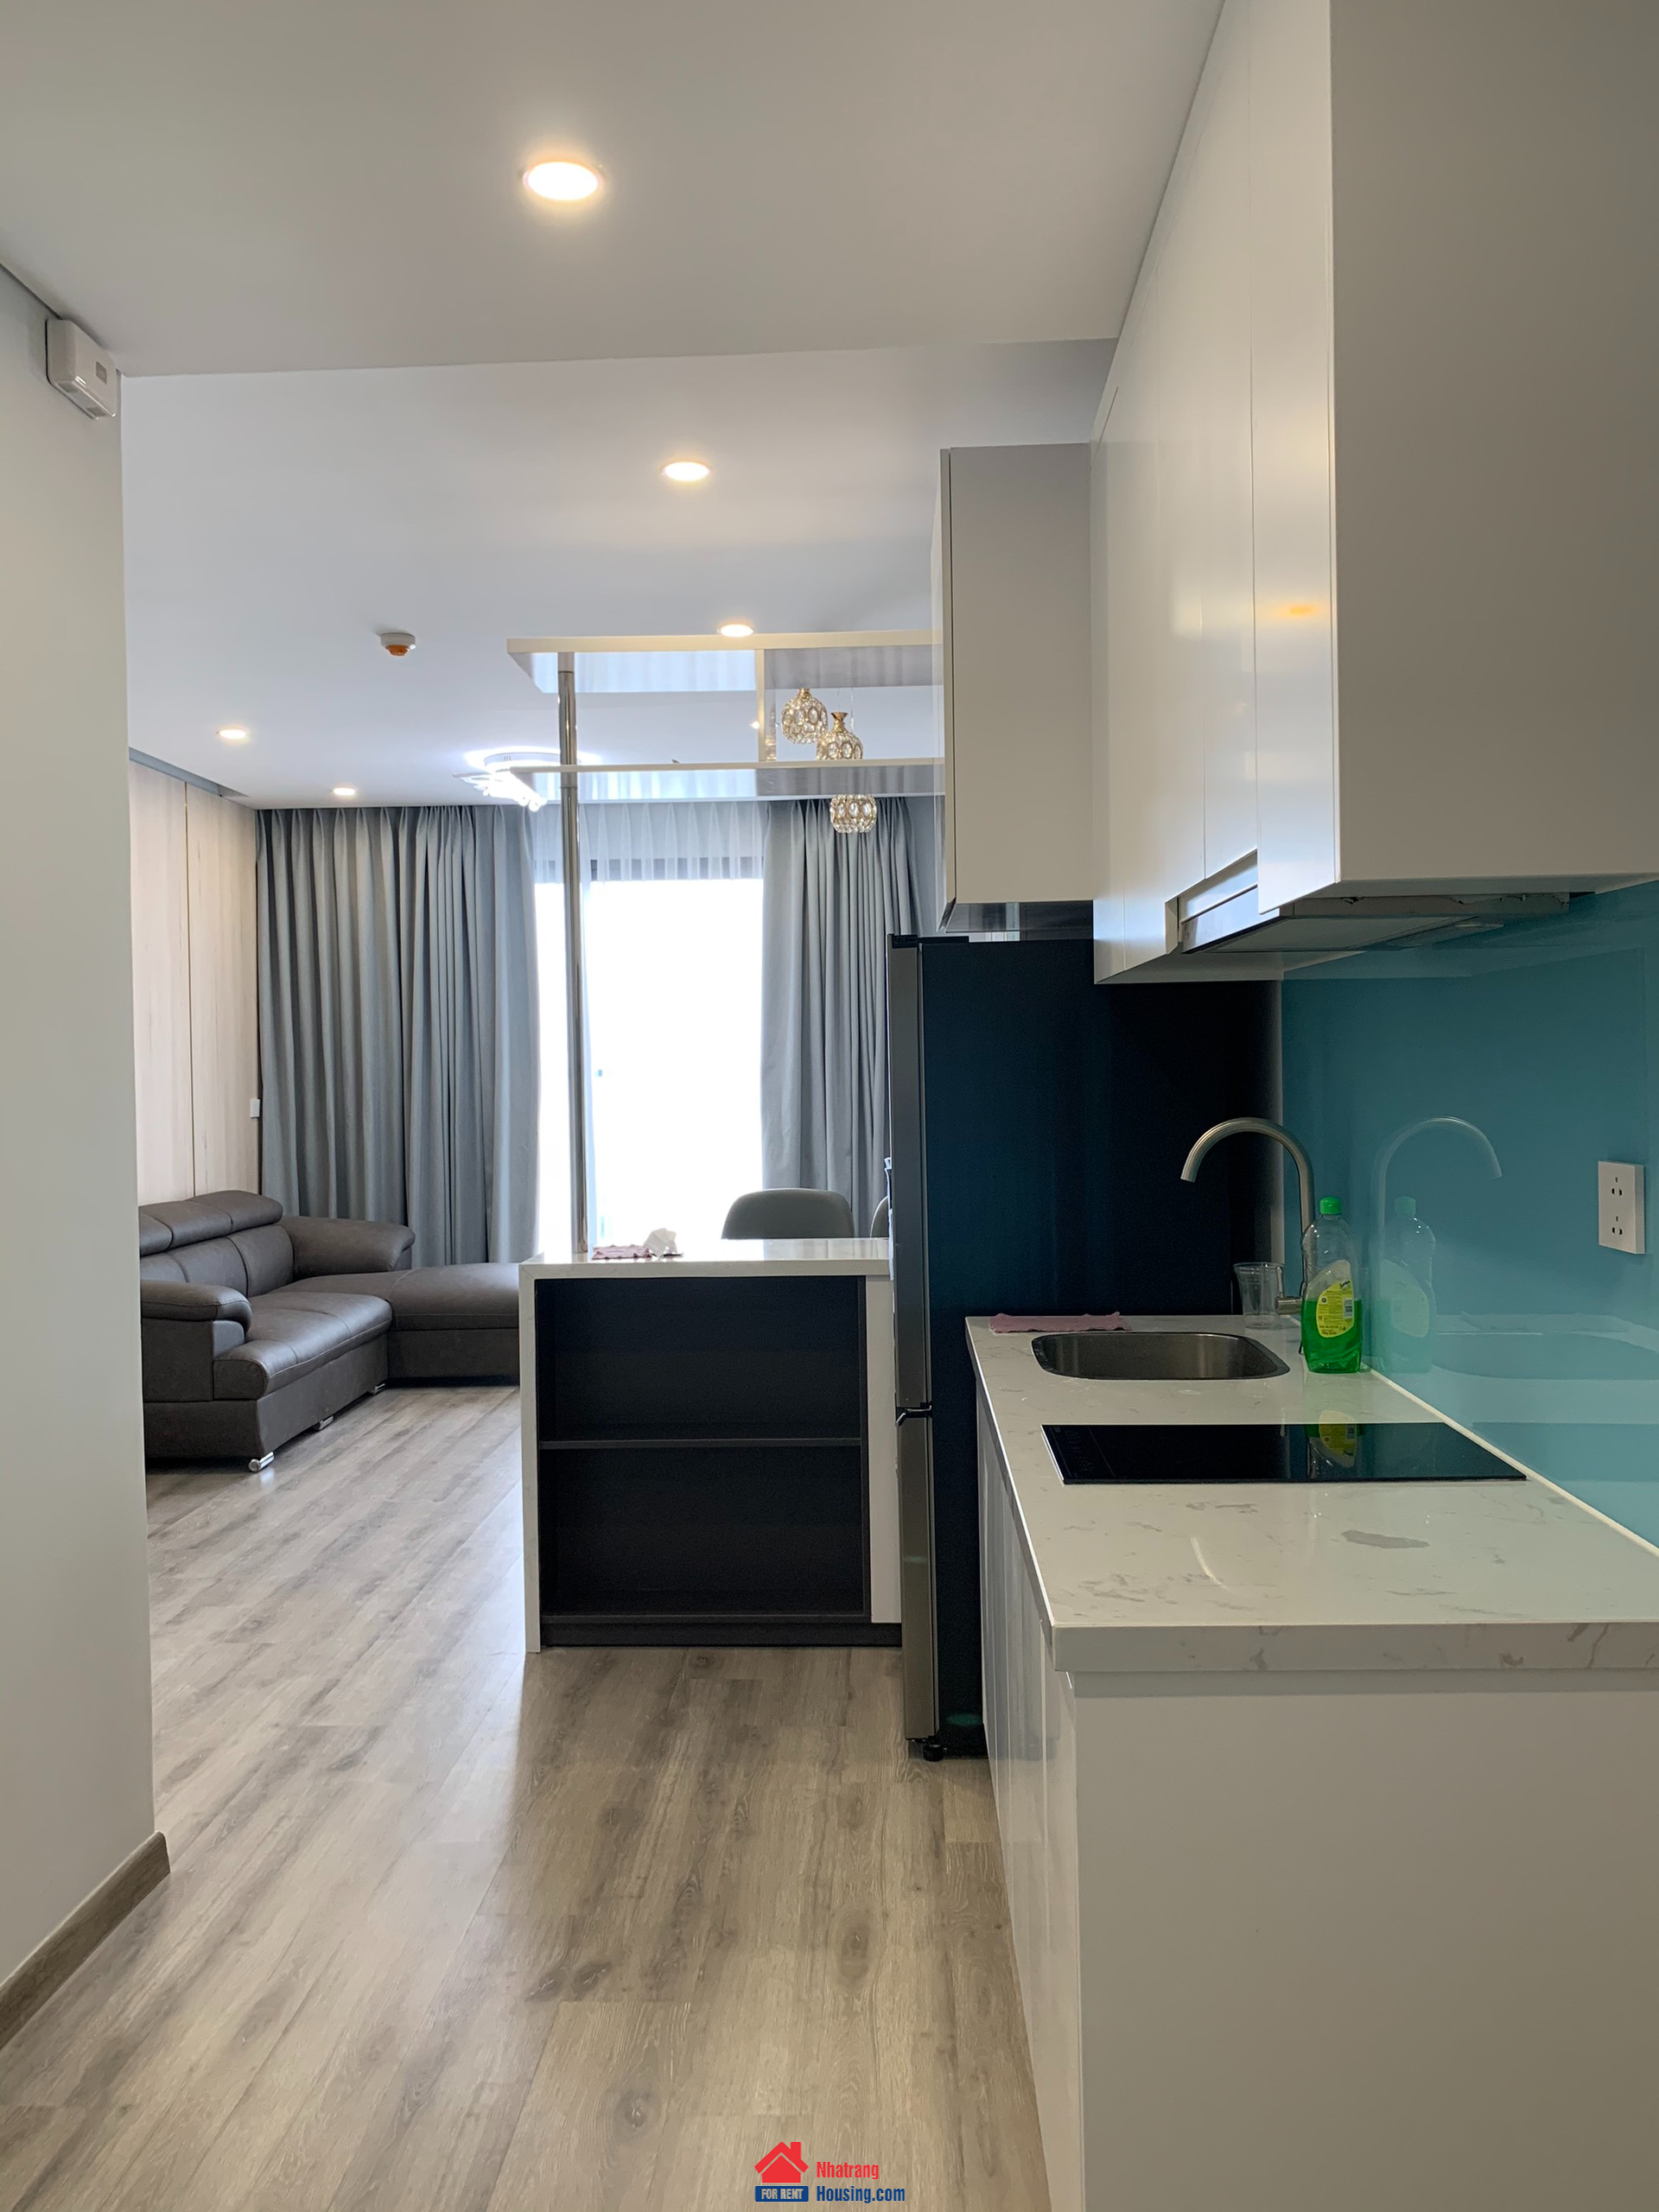 Marina Suites Nha Trang Apartment for rent | 2 bedrooms, 83m2 | 12 million